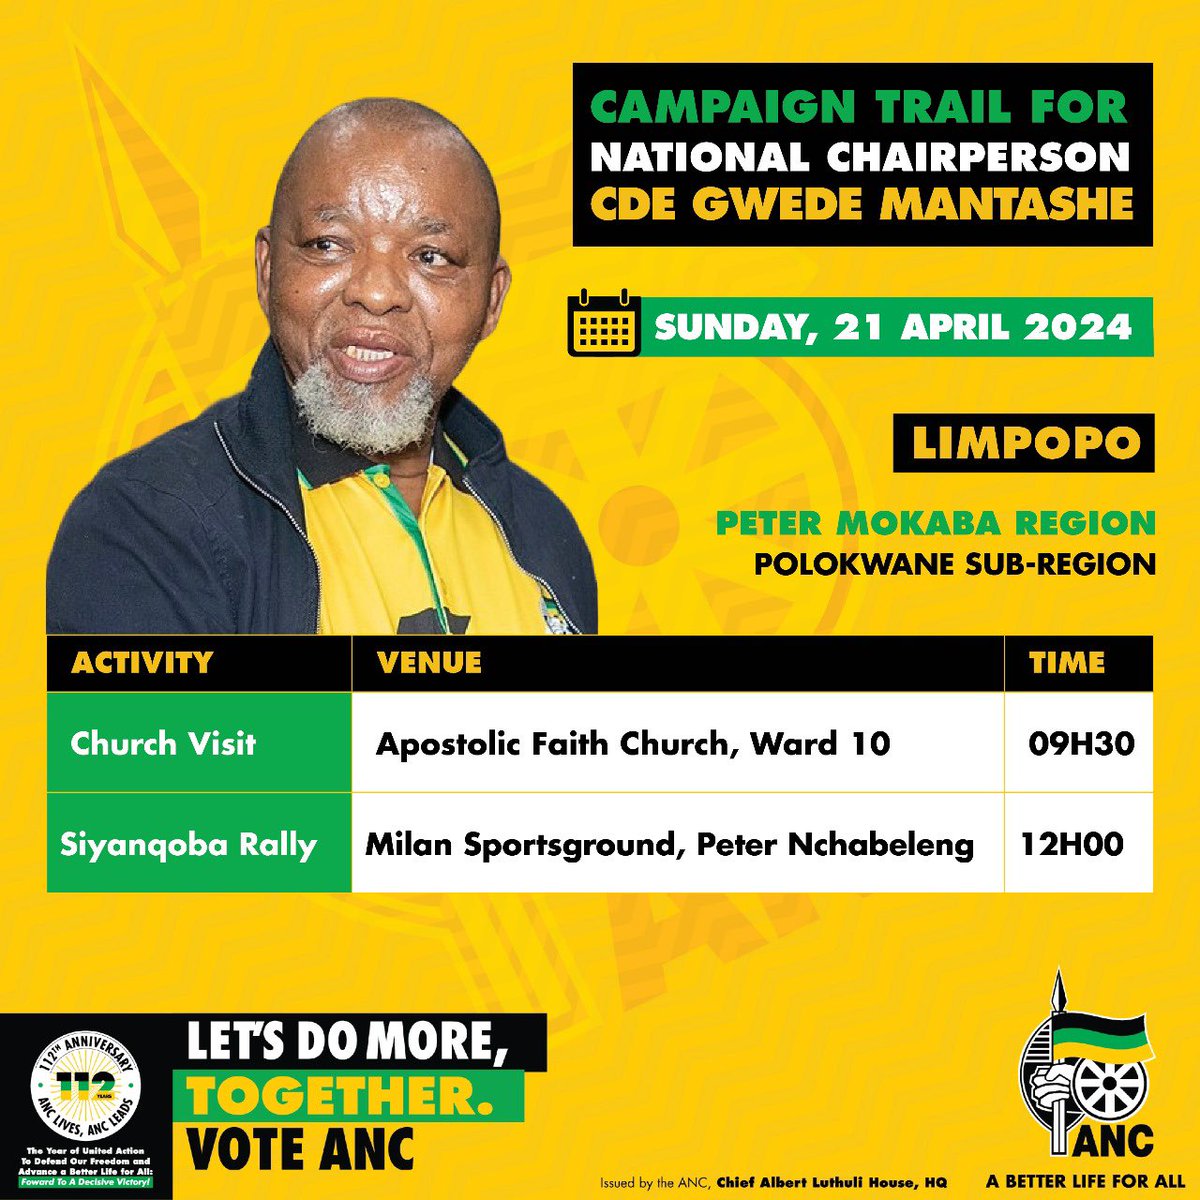 ANC NC CDE GWEDE MANTASHE EMBARKS ON AN ELECTION CAMPAIGN TRAIL IN LIMPOPO PROVINCE. #VoteANC #VoteANC2024 #LetsDoMoreTogether